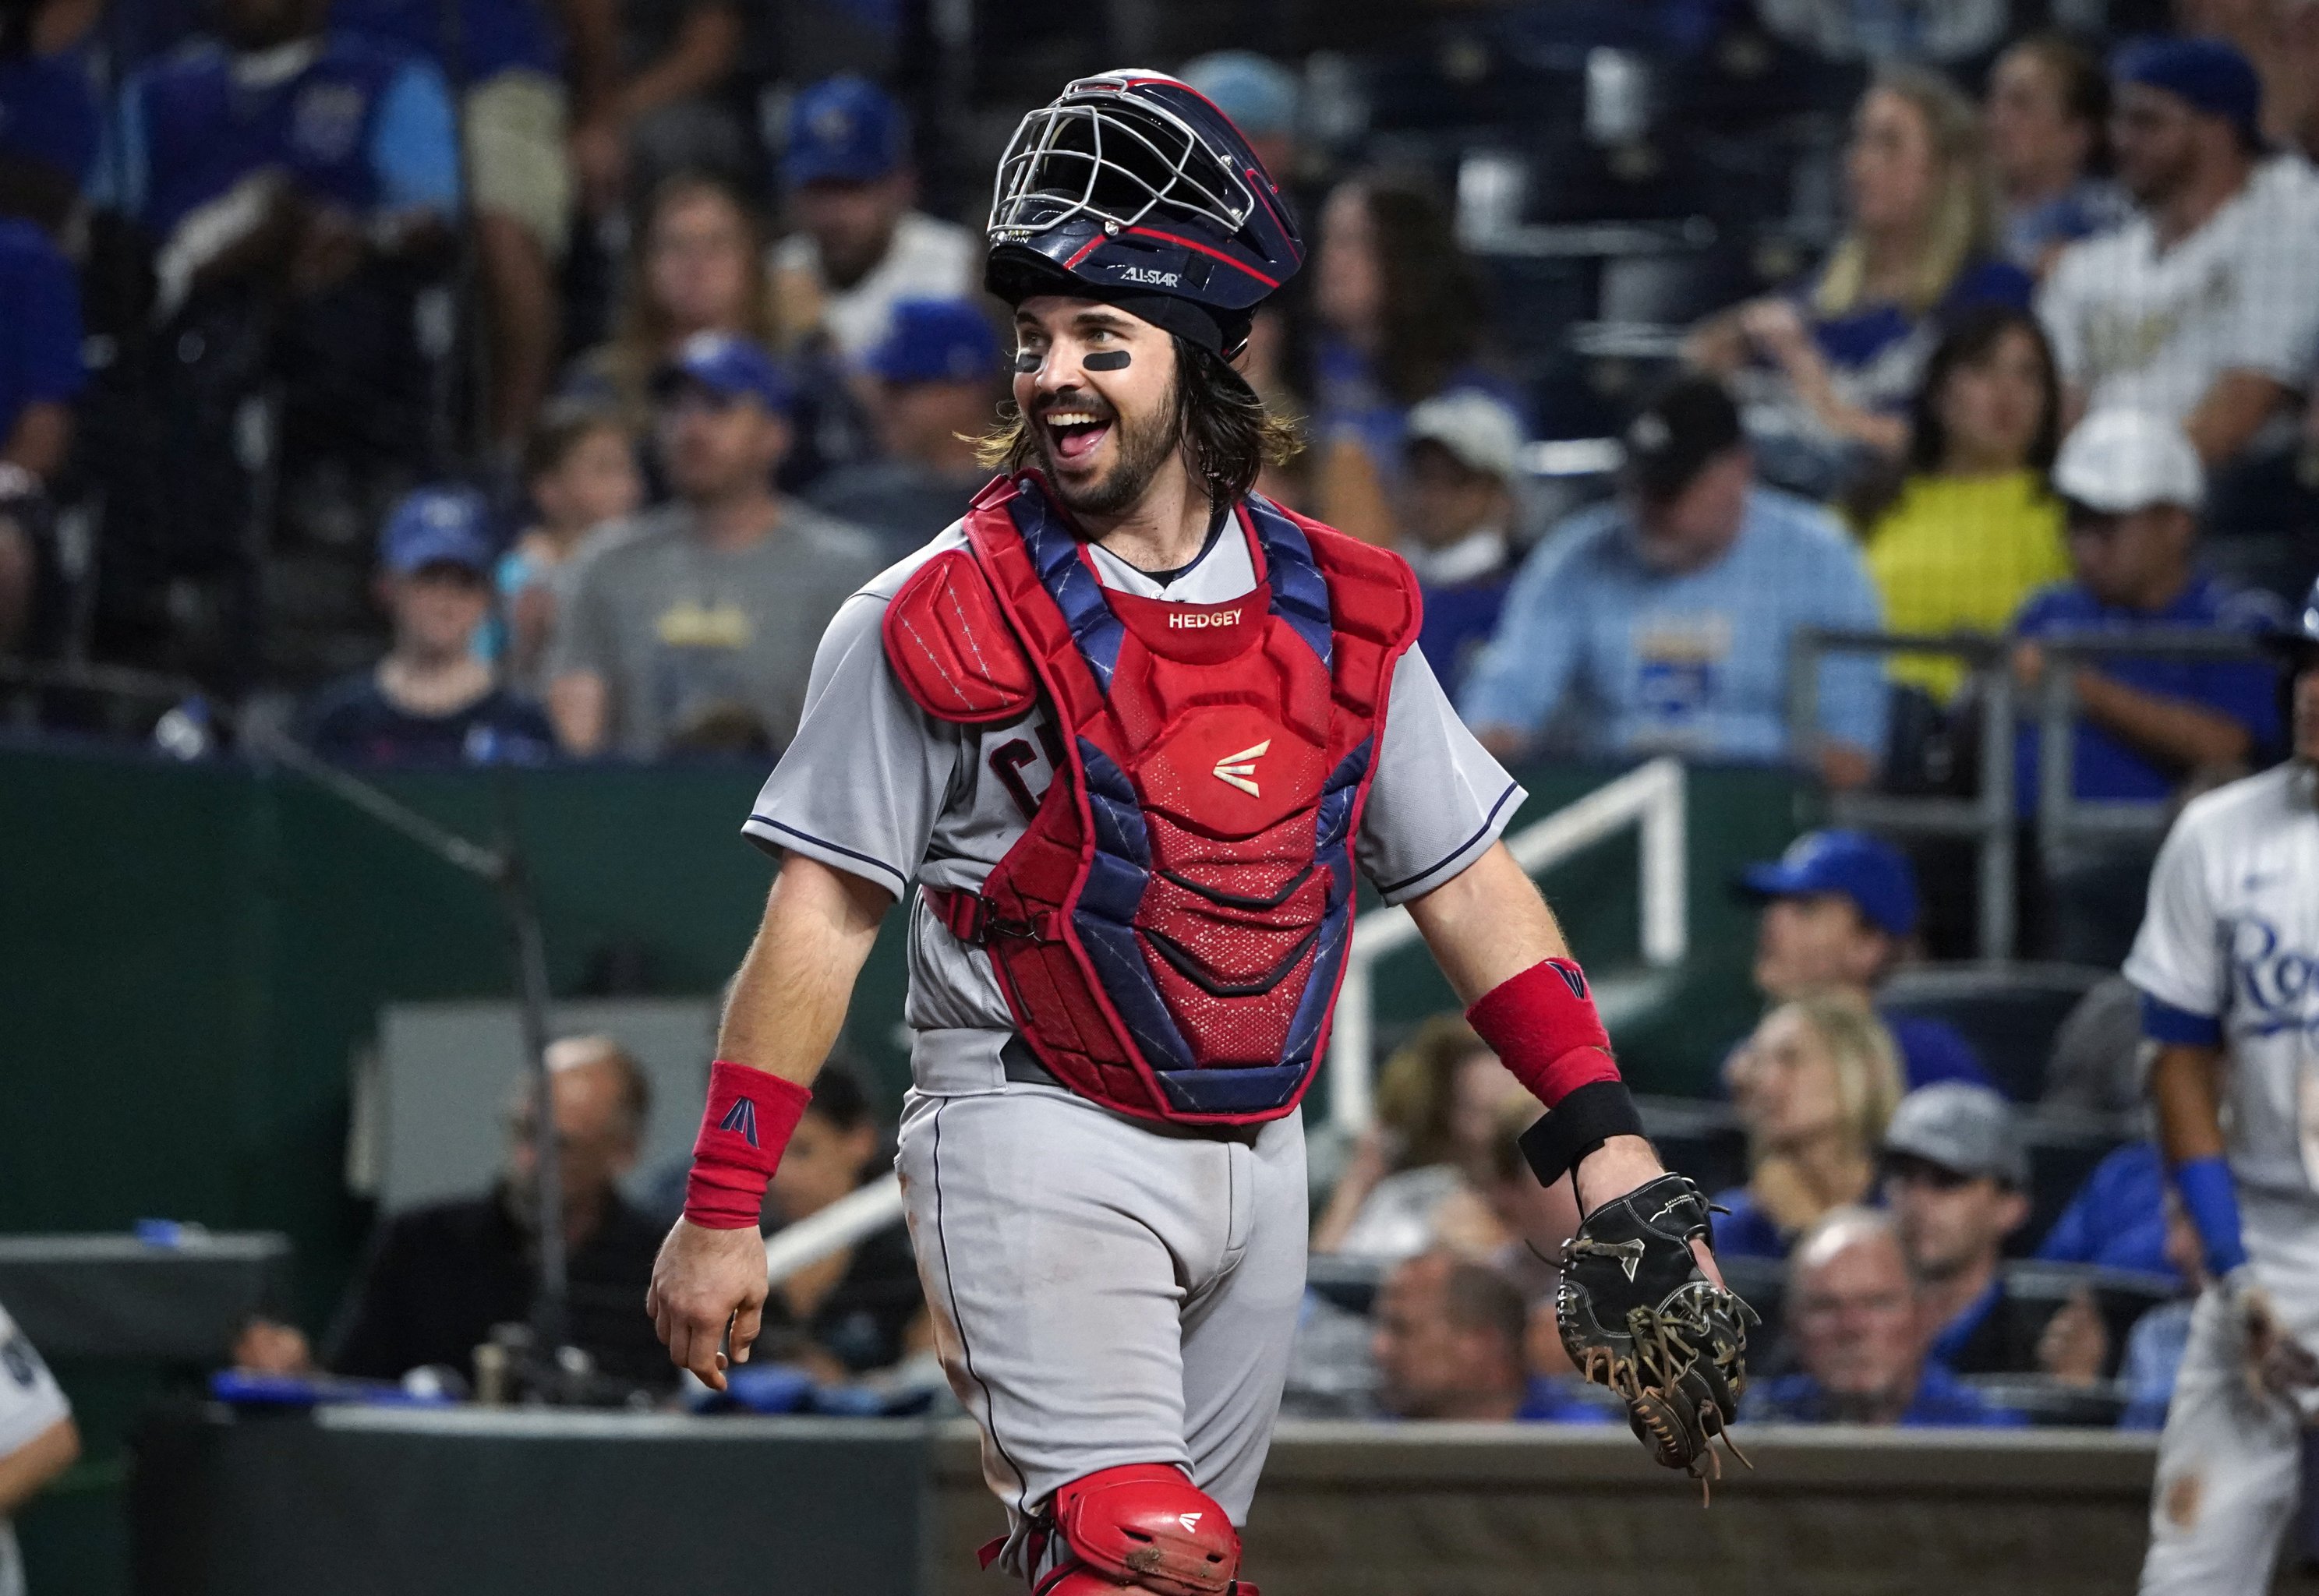 Jason Castro - MLB Catcher - News, Stats, Bio and more - The Athletic